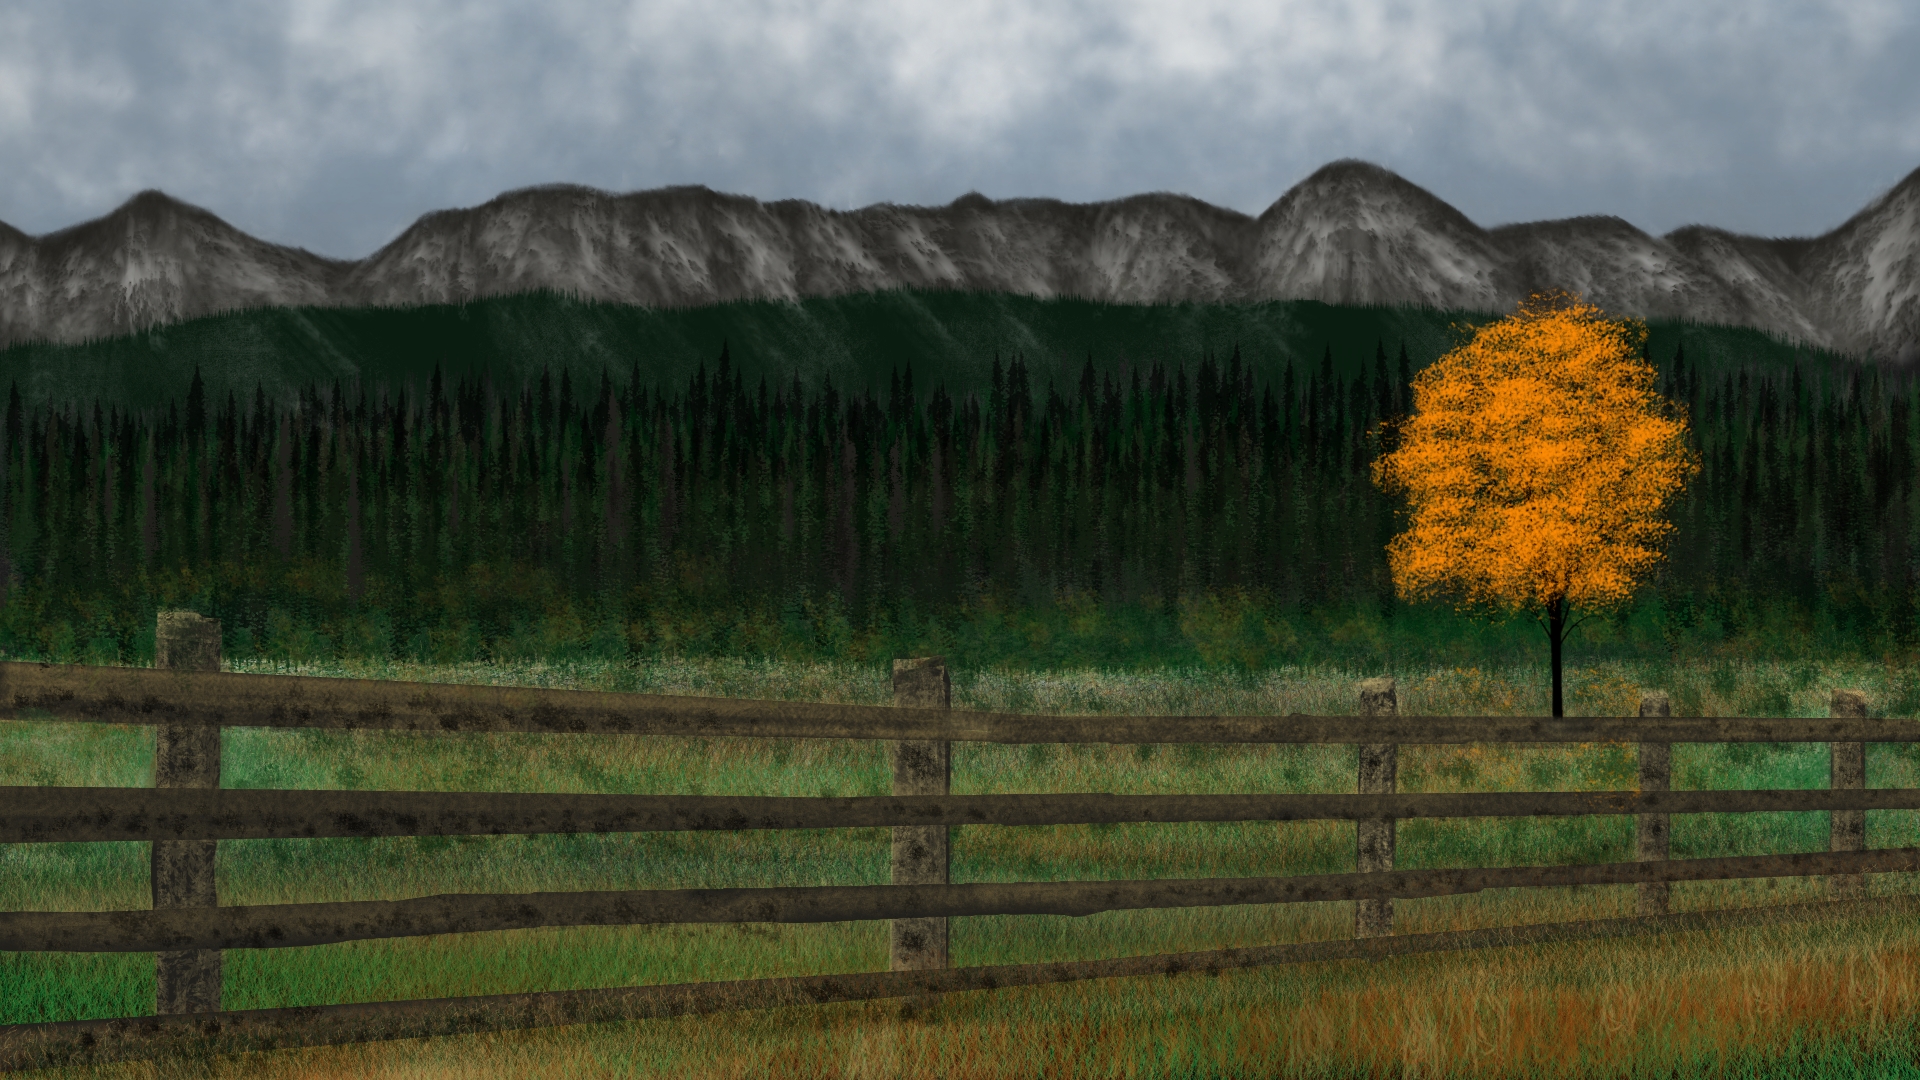 General 1920x1080 digital painting nature fence trees mountains